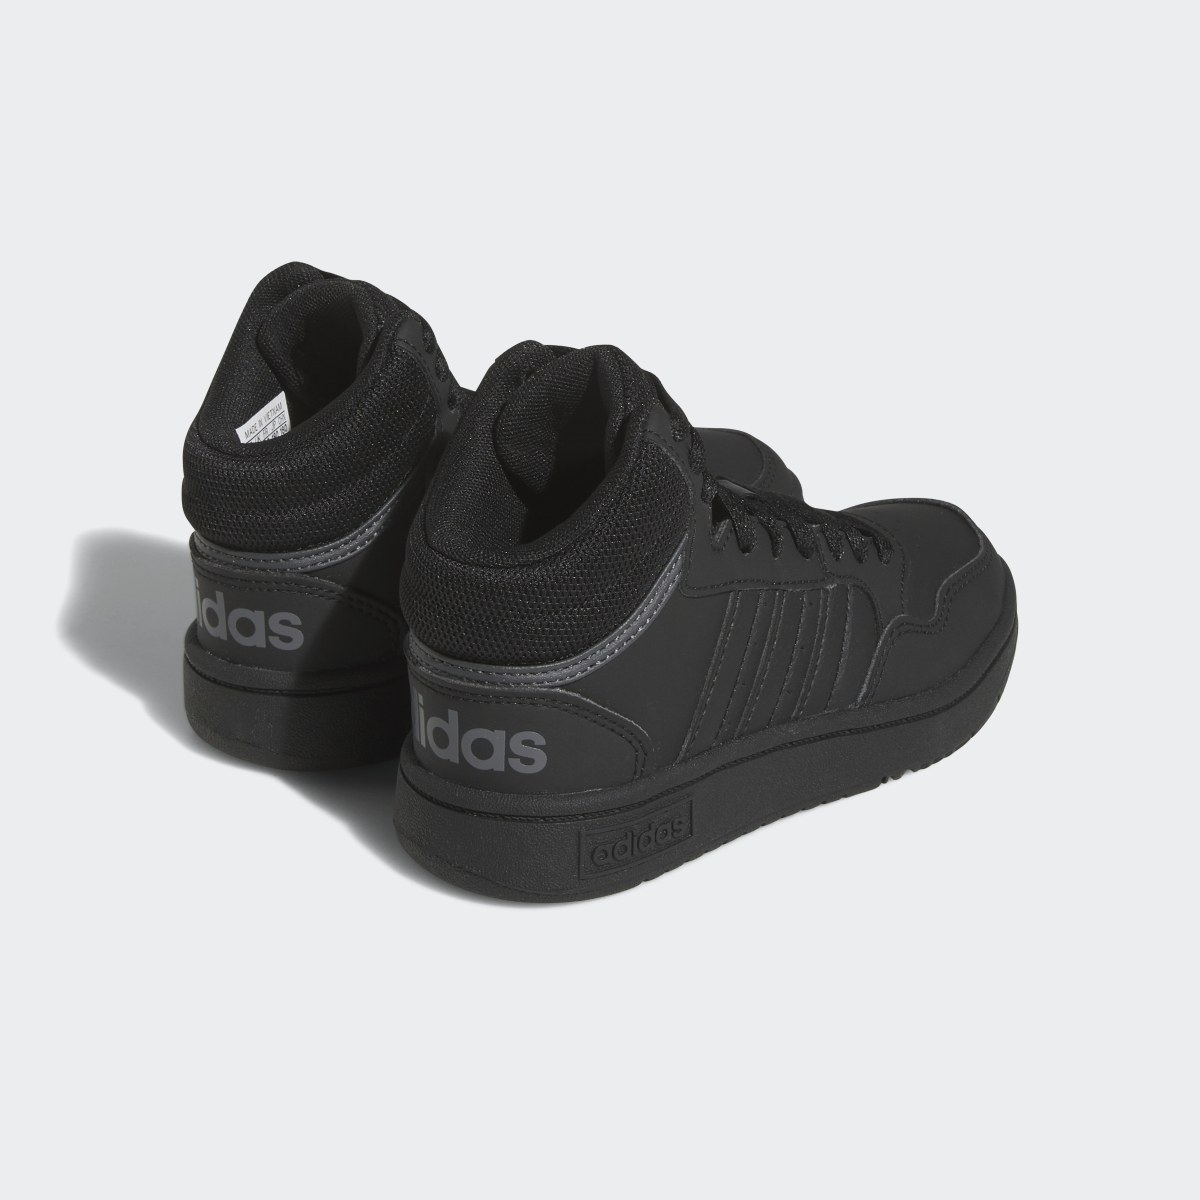 Adidas Hoops Mid Shoes. 6